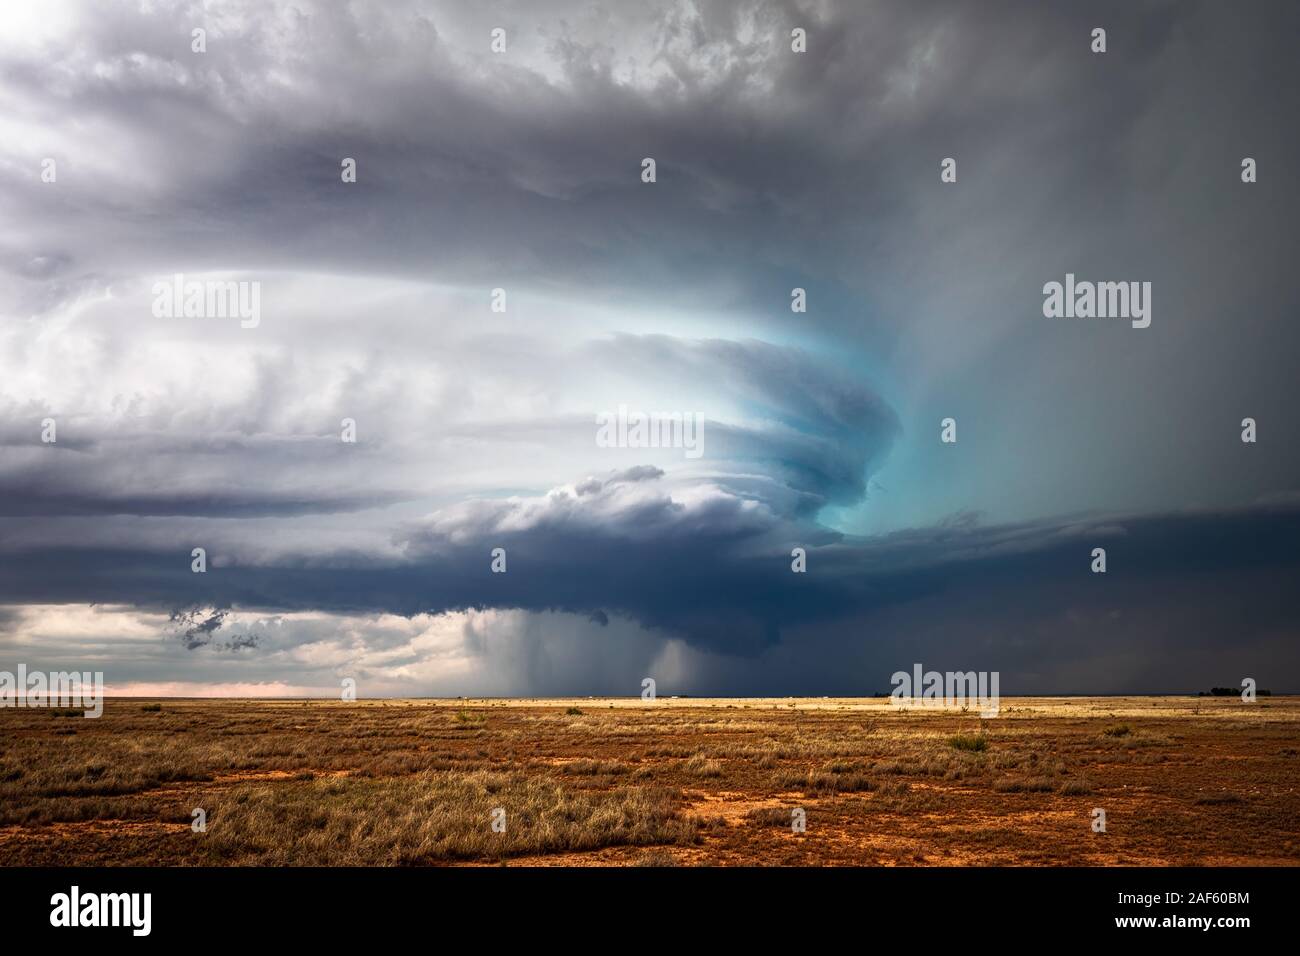 Dramatic supercell thunderstorm with ominous storm clouds spins across the plains near Roswell, New Mexico Stock Photo